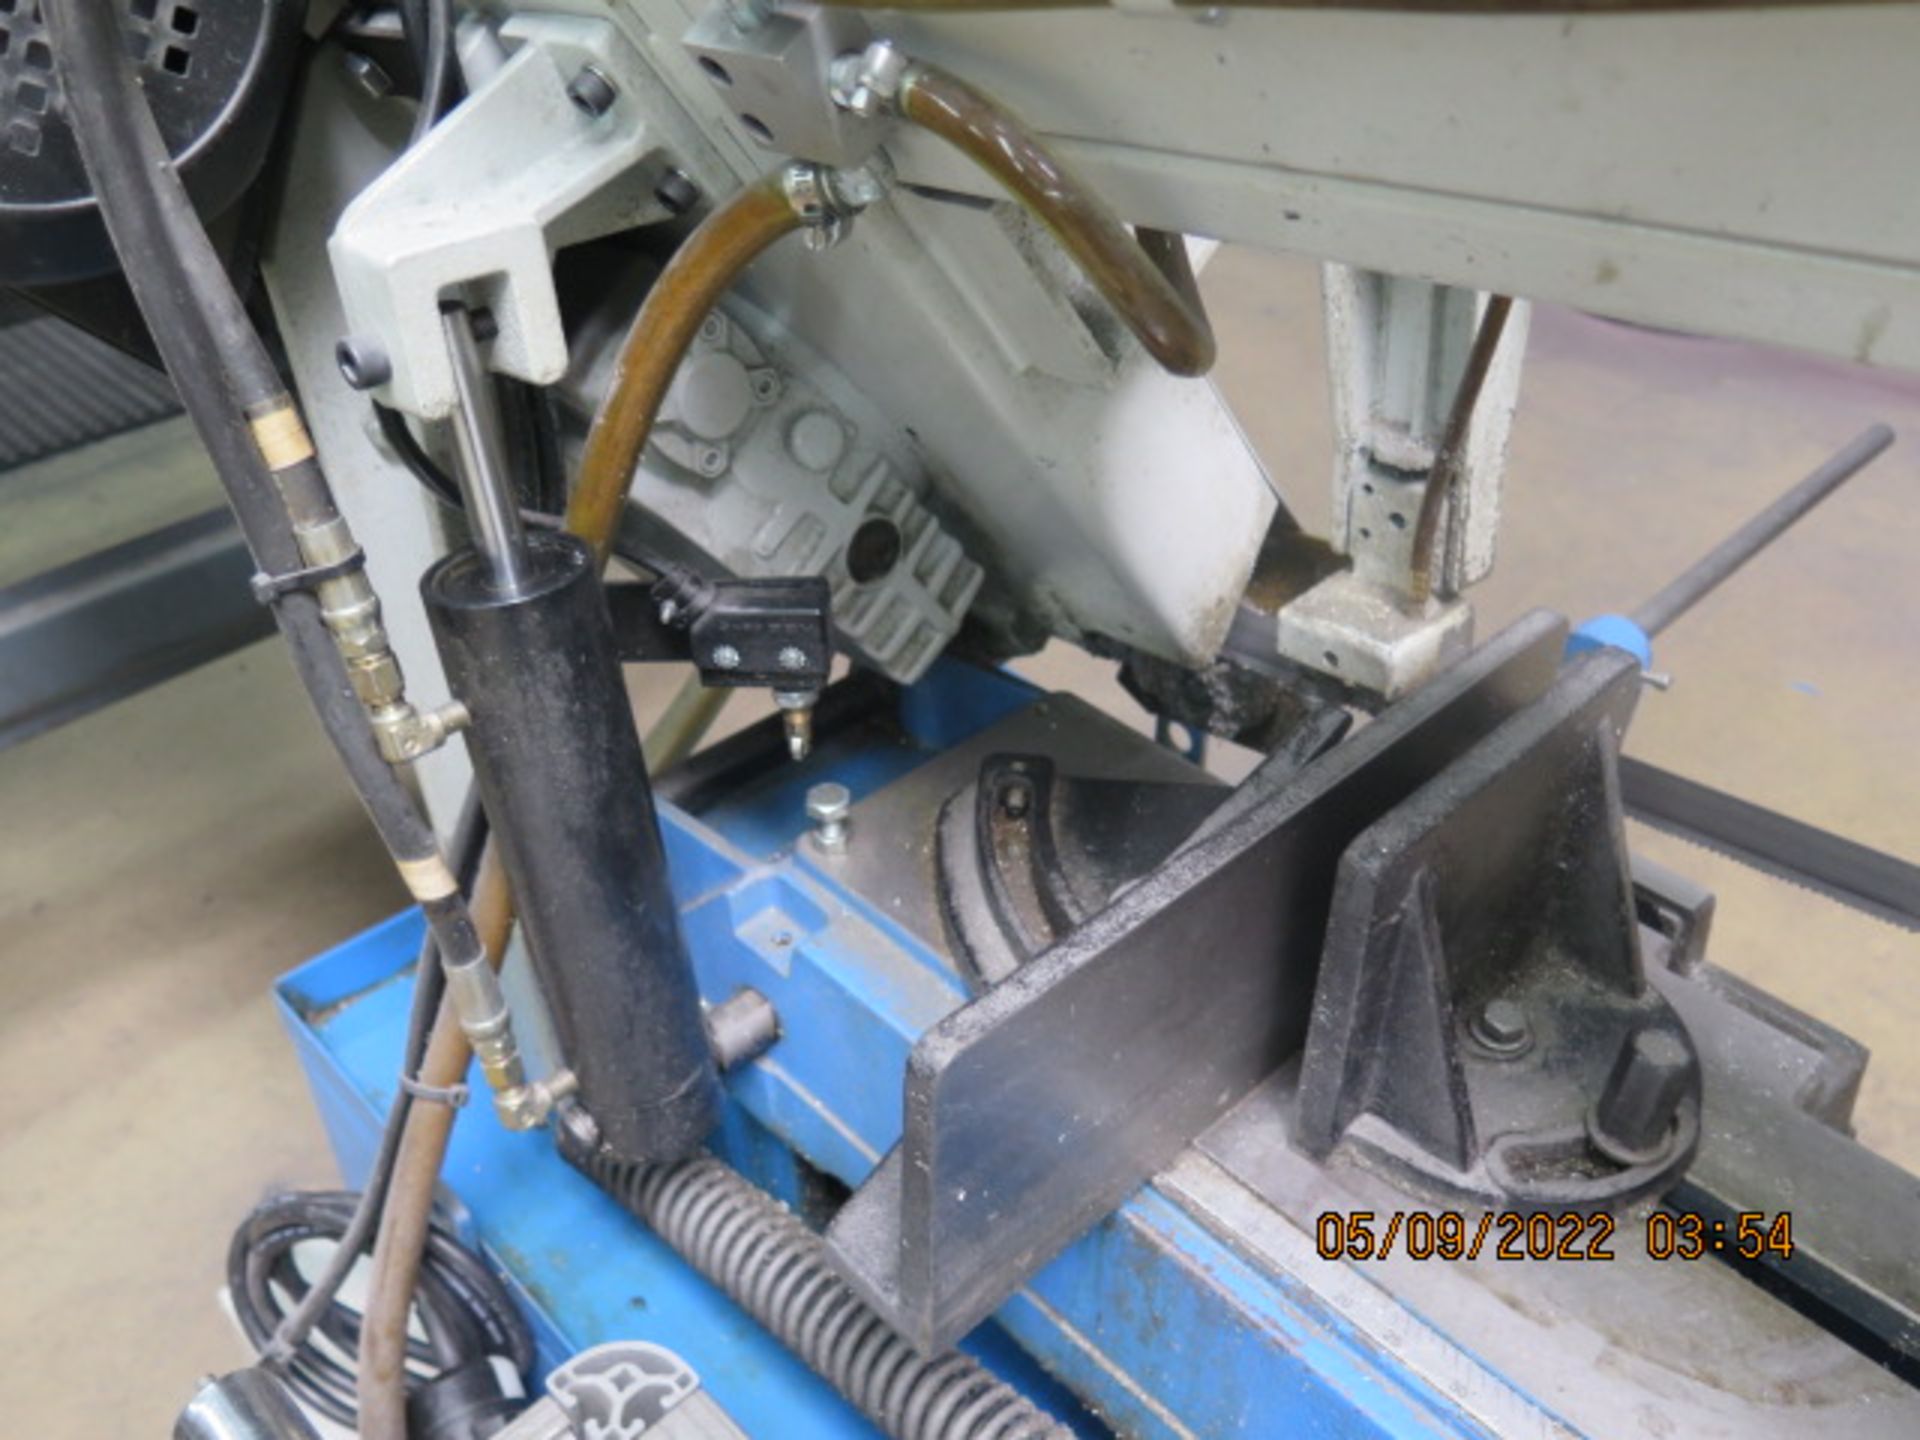 Acra RF-1018SV 10” Horizontal Miter Band Saw s/n 59H1631 w/ Manual Clamping, Work Stop, SOLD AS IS - Image 6 of 8